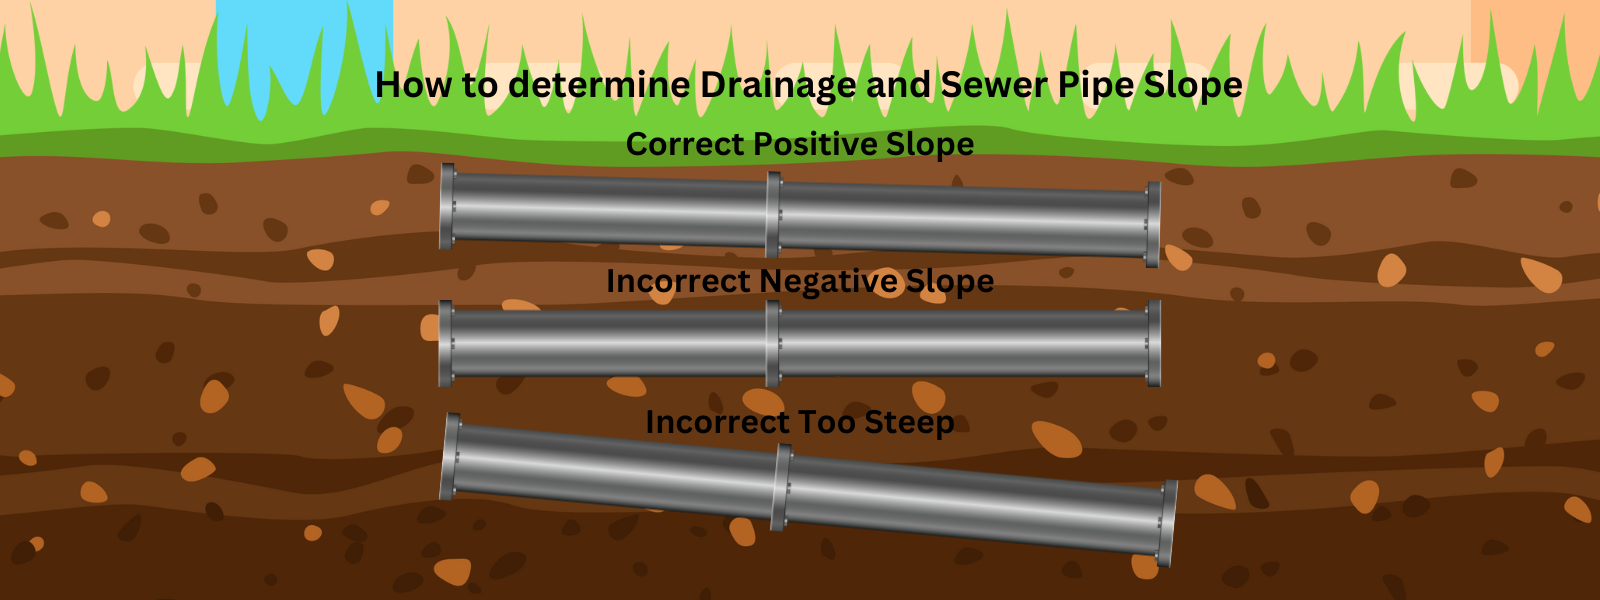 How to determine Drainage and Sewer Pipe Slope?